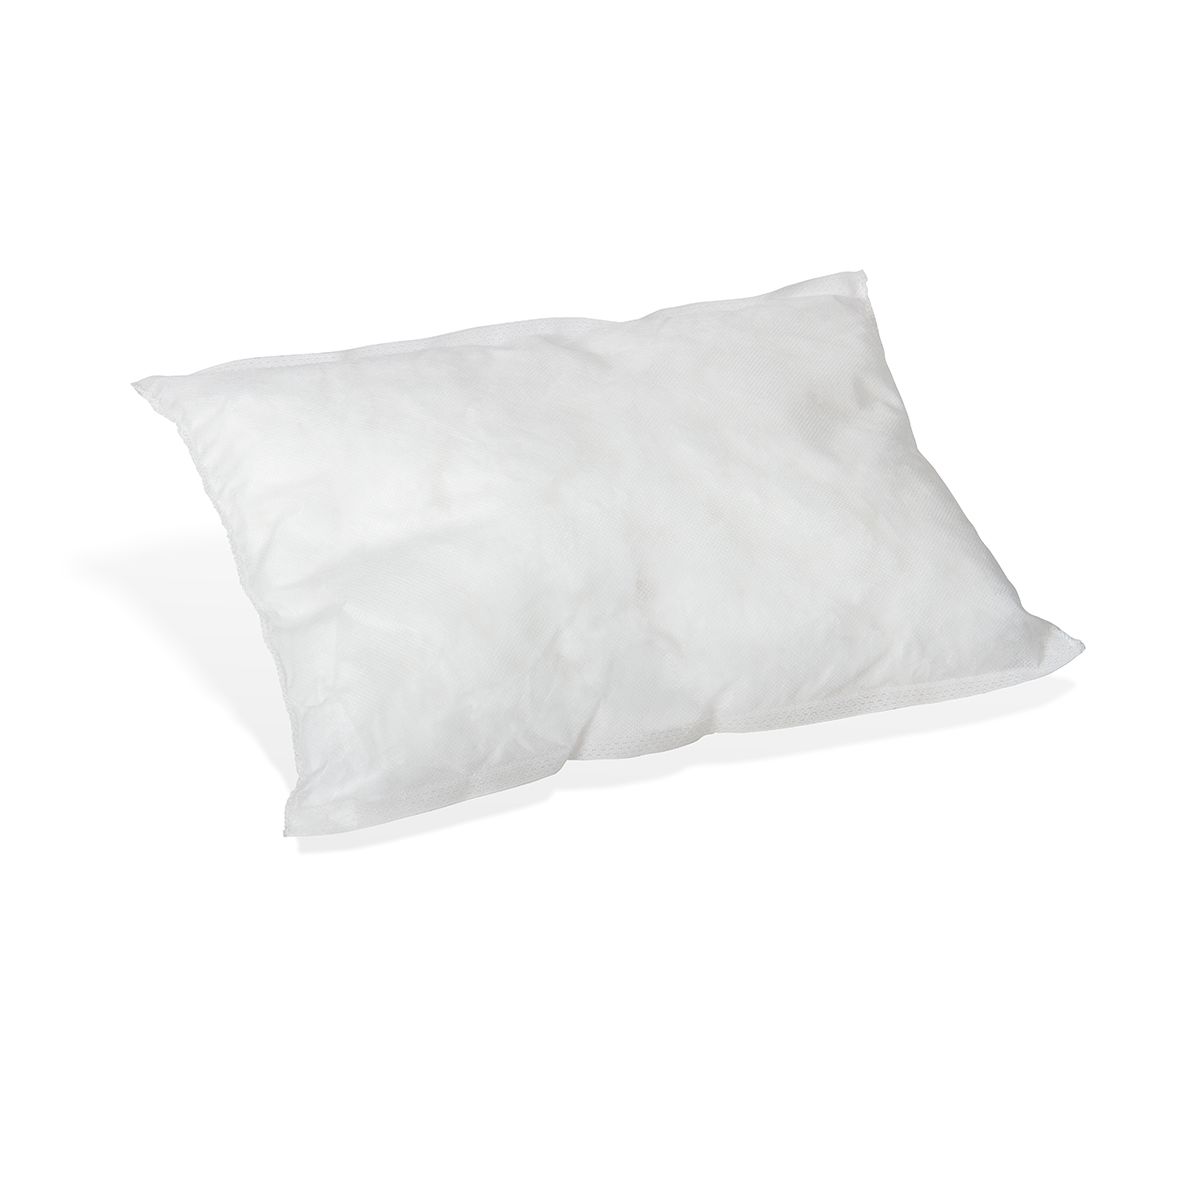 RS PRO Spill Absorbent Pillow for Oil Use, 32 L Capacity, 8 per Pack